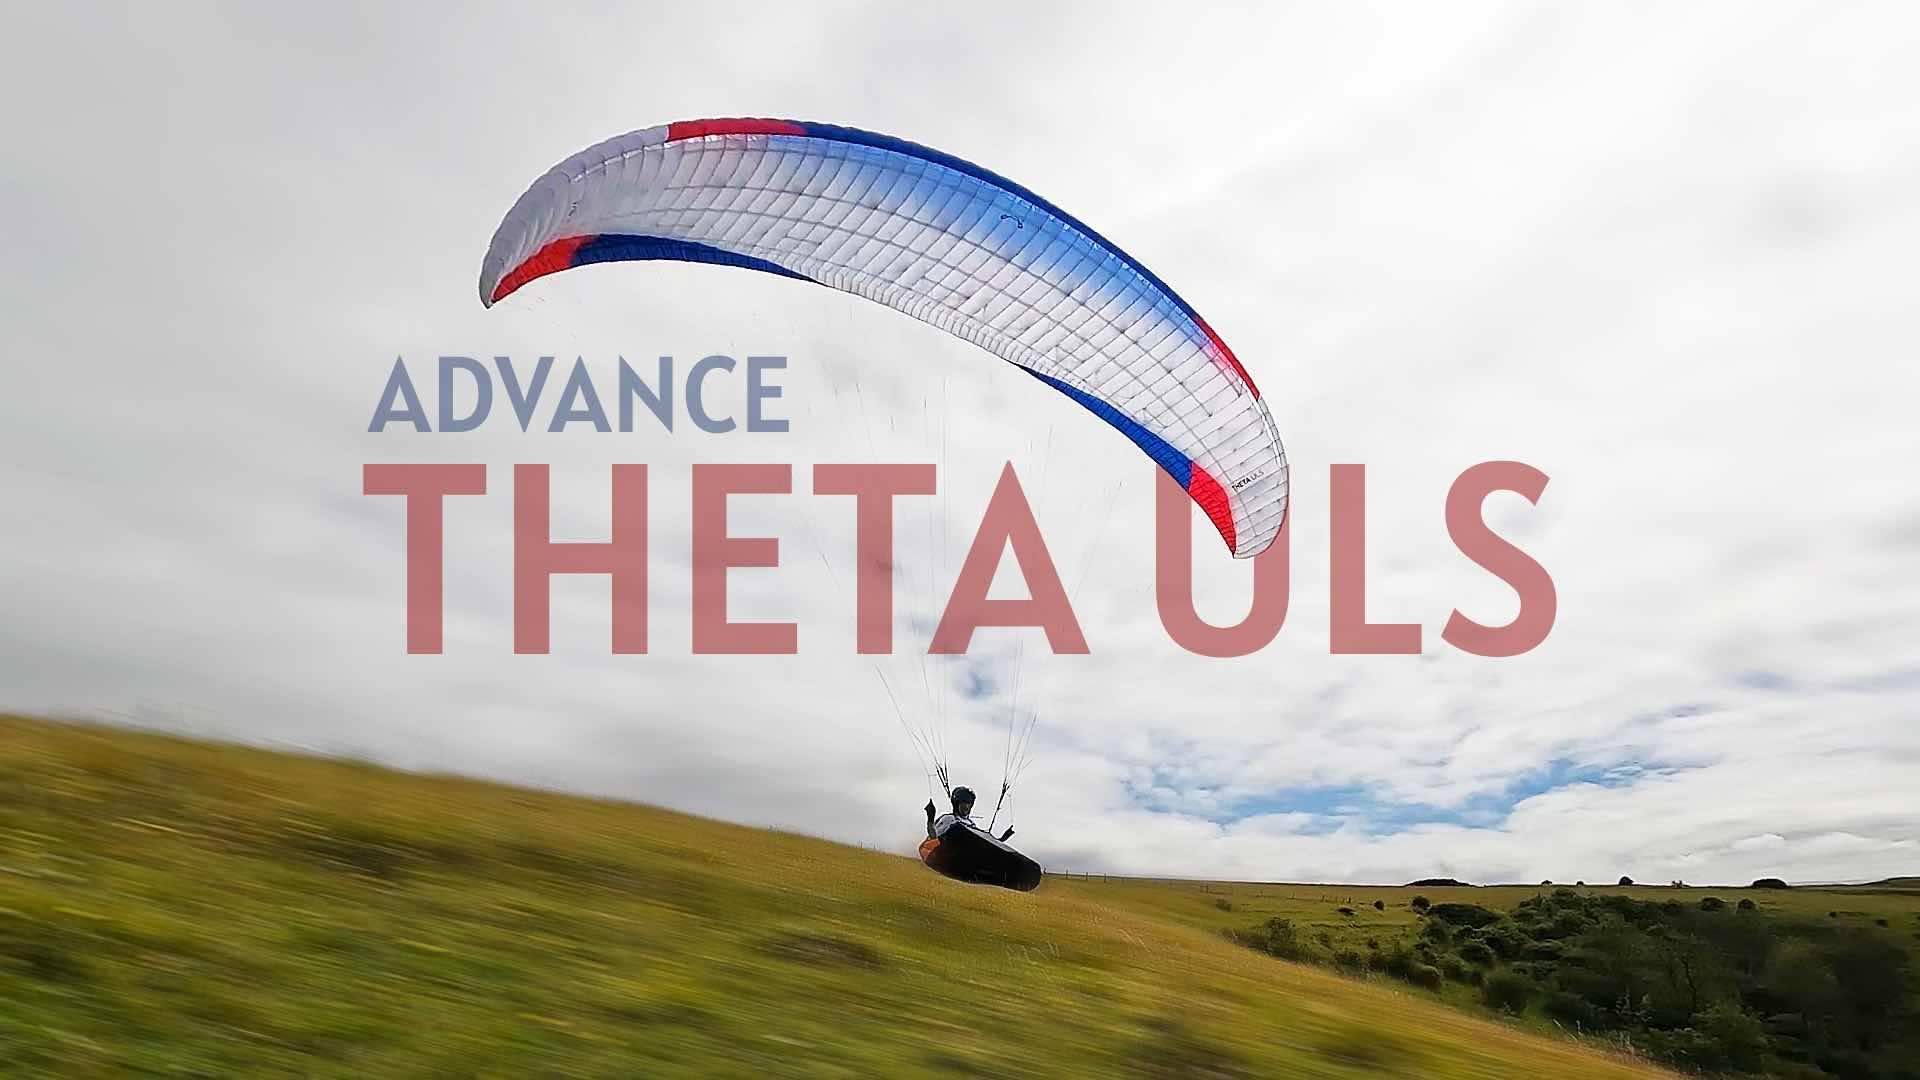 Advance THETA ULS Paraglider Review